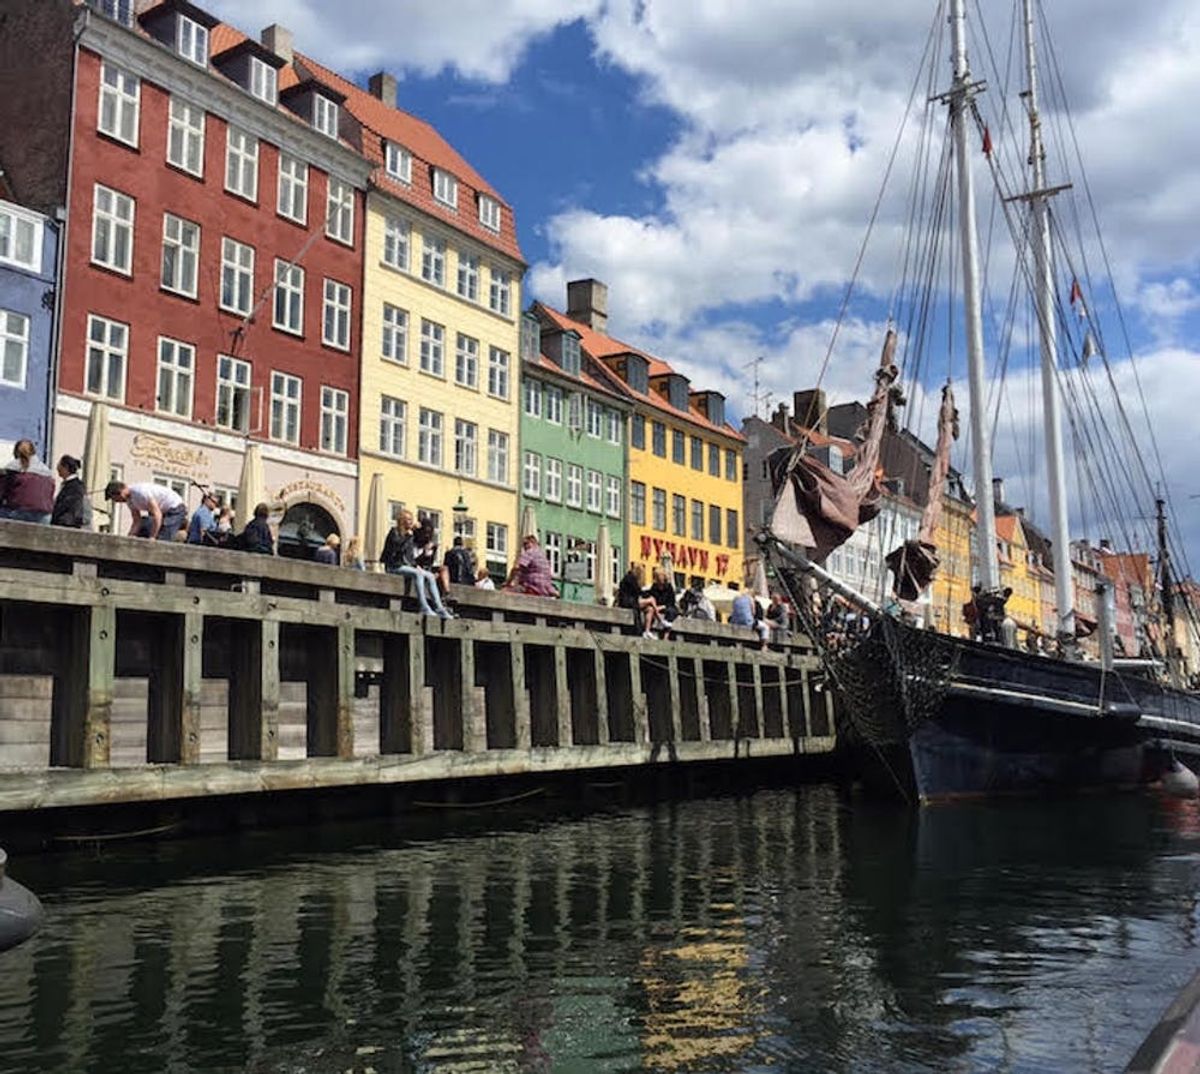 8 Souvenirs to Score from Copenhagen (+ Where to Buy Online!)